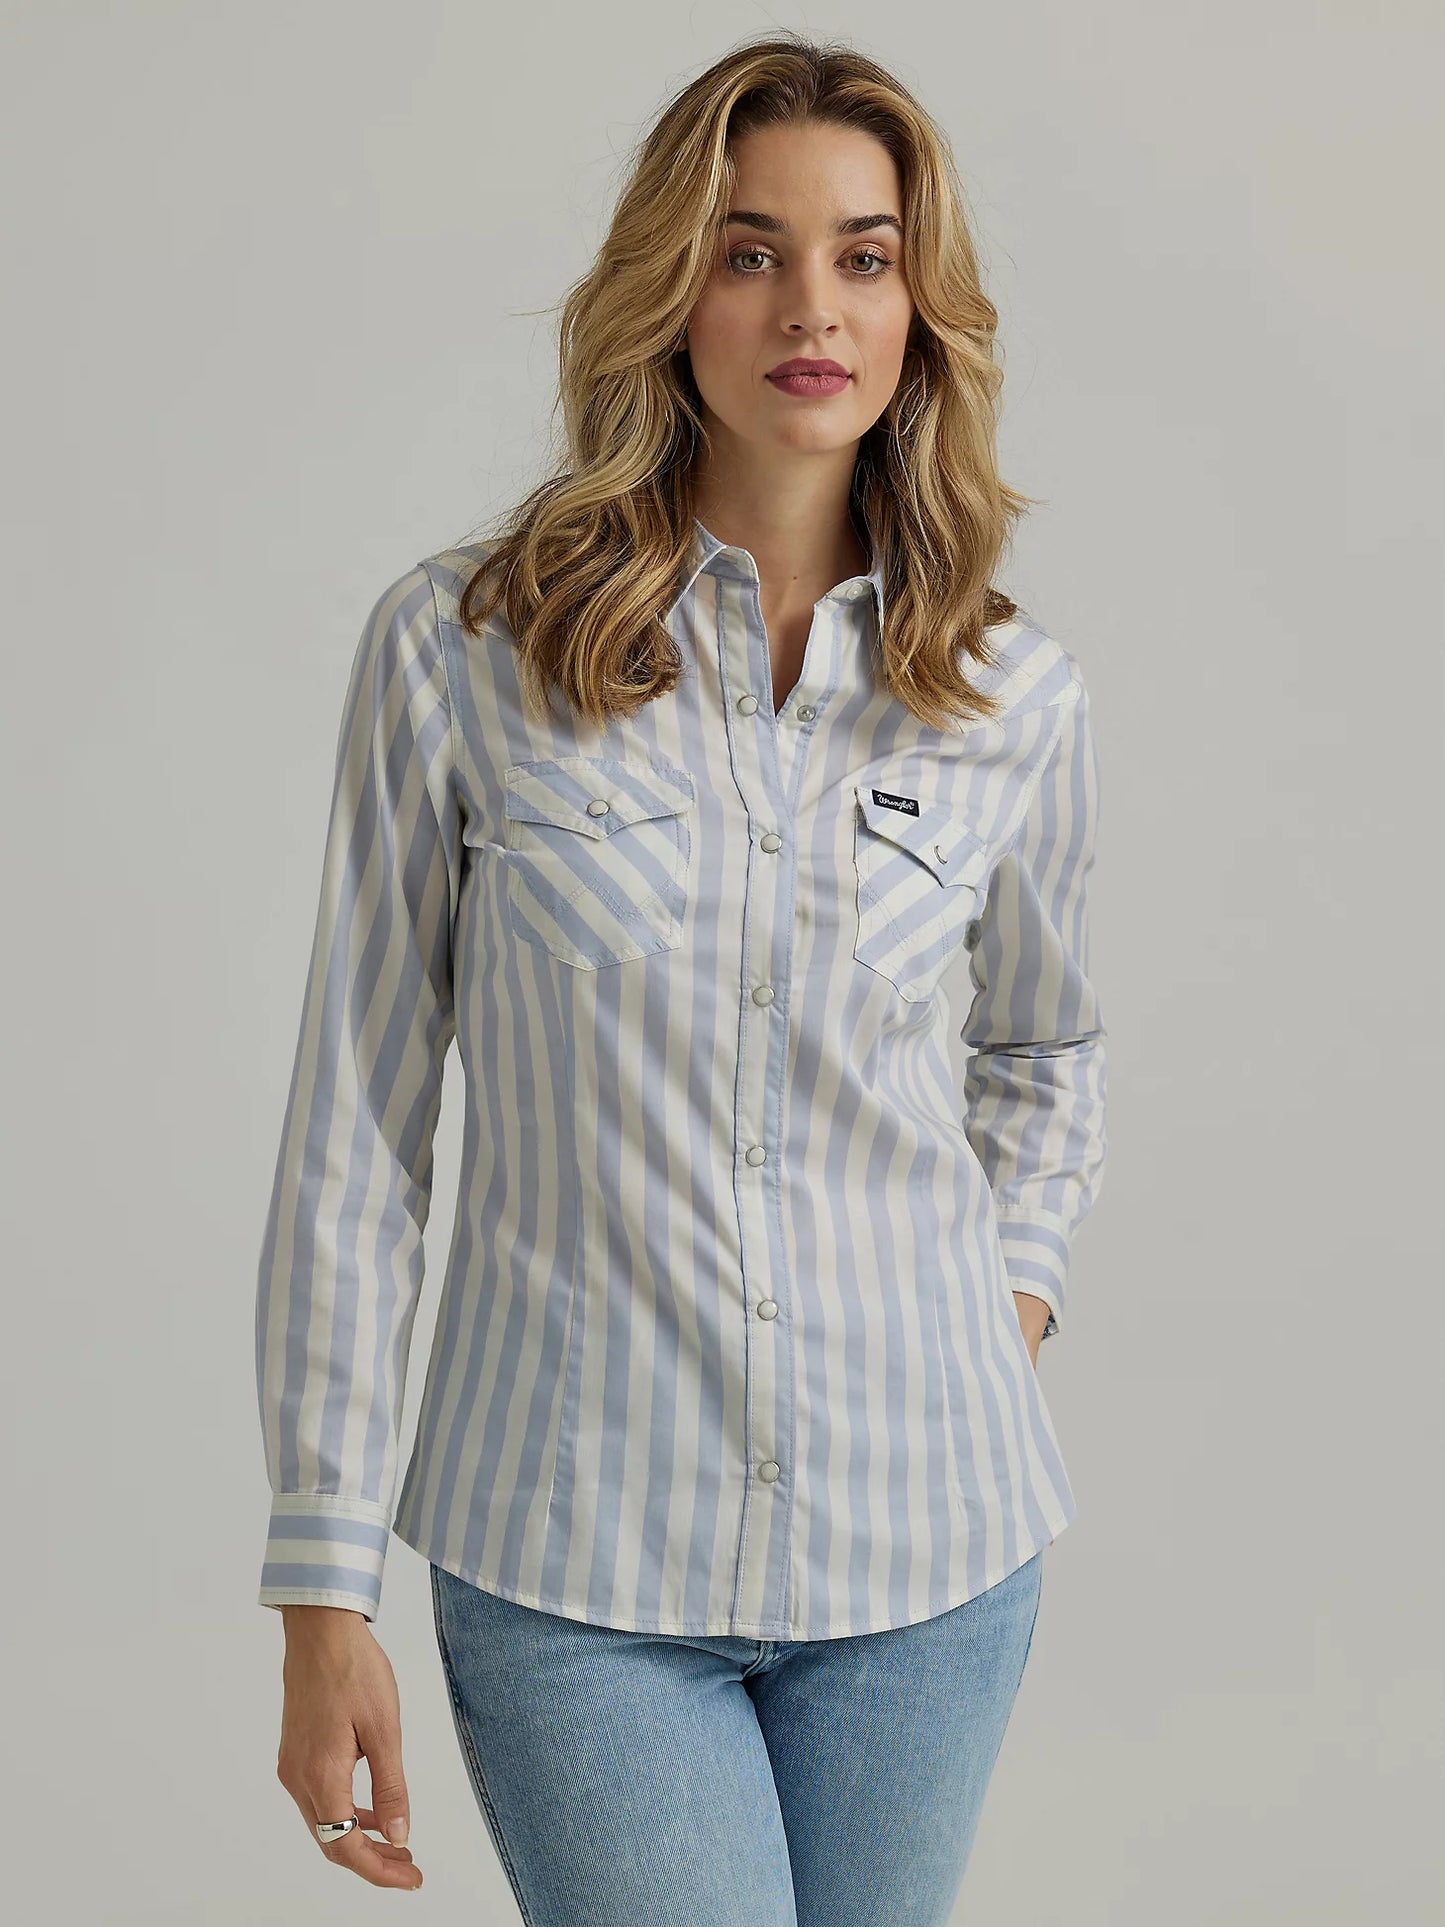 Women's Wrangler All Occasion Western Snap Shirt in Blue Stripes